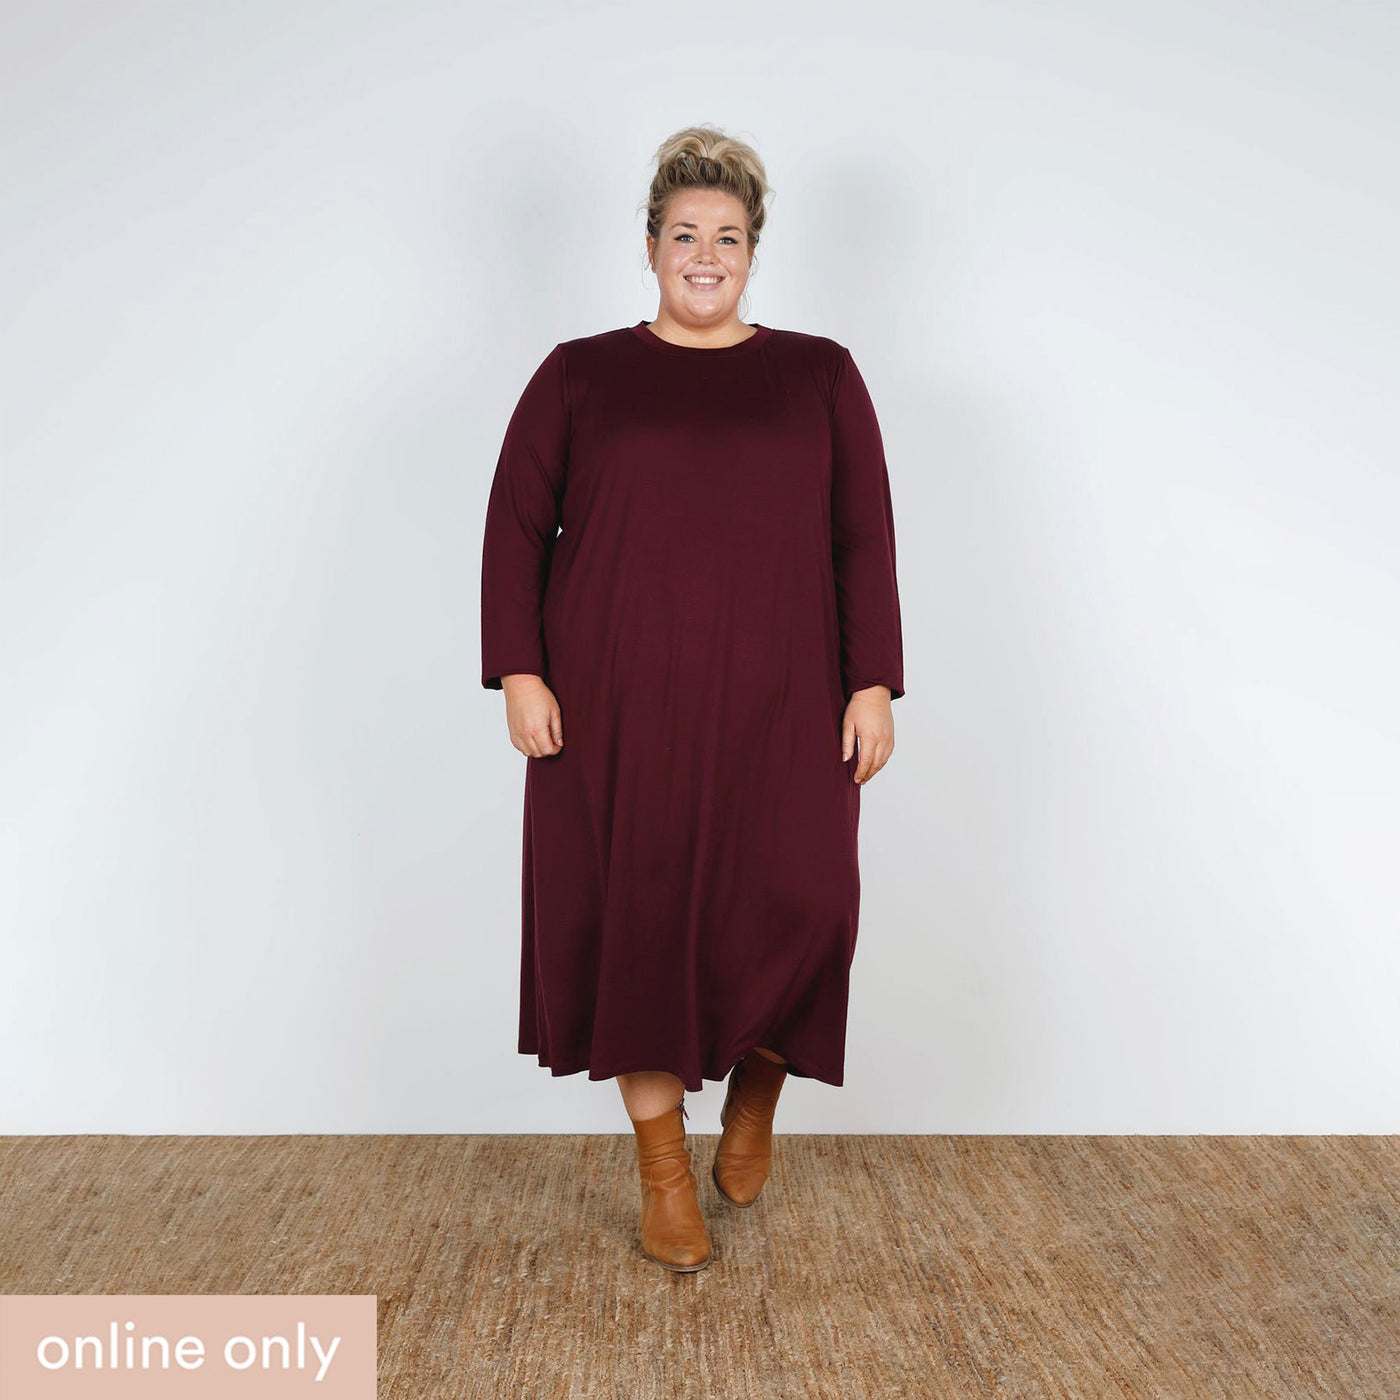 The Mabel Dress – The Stockplace